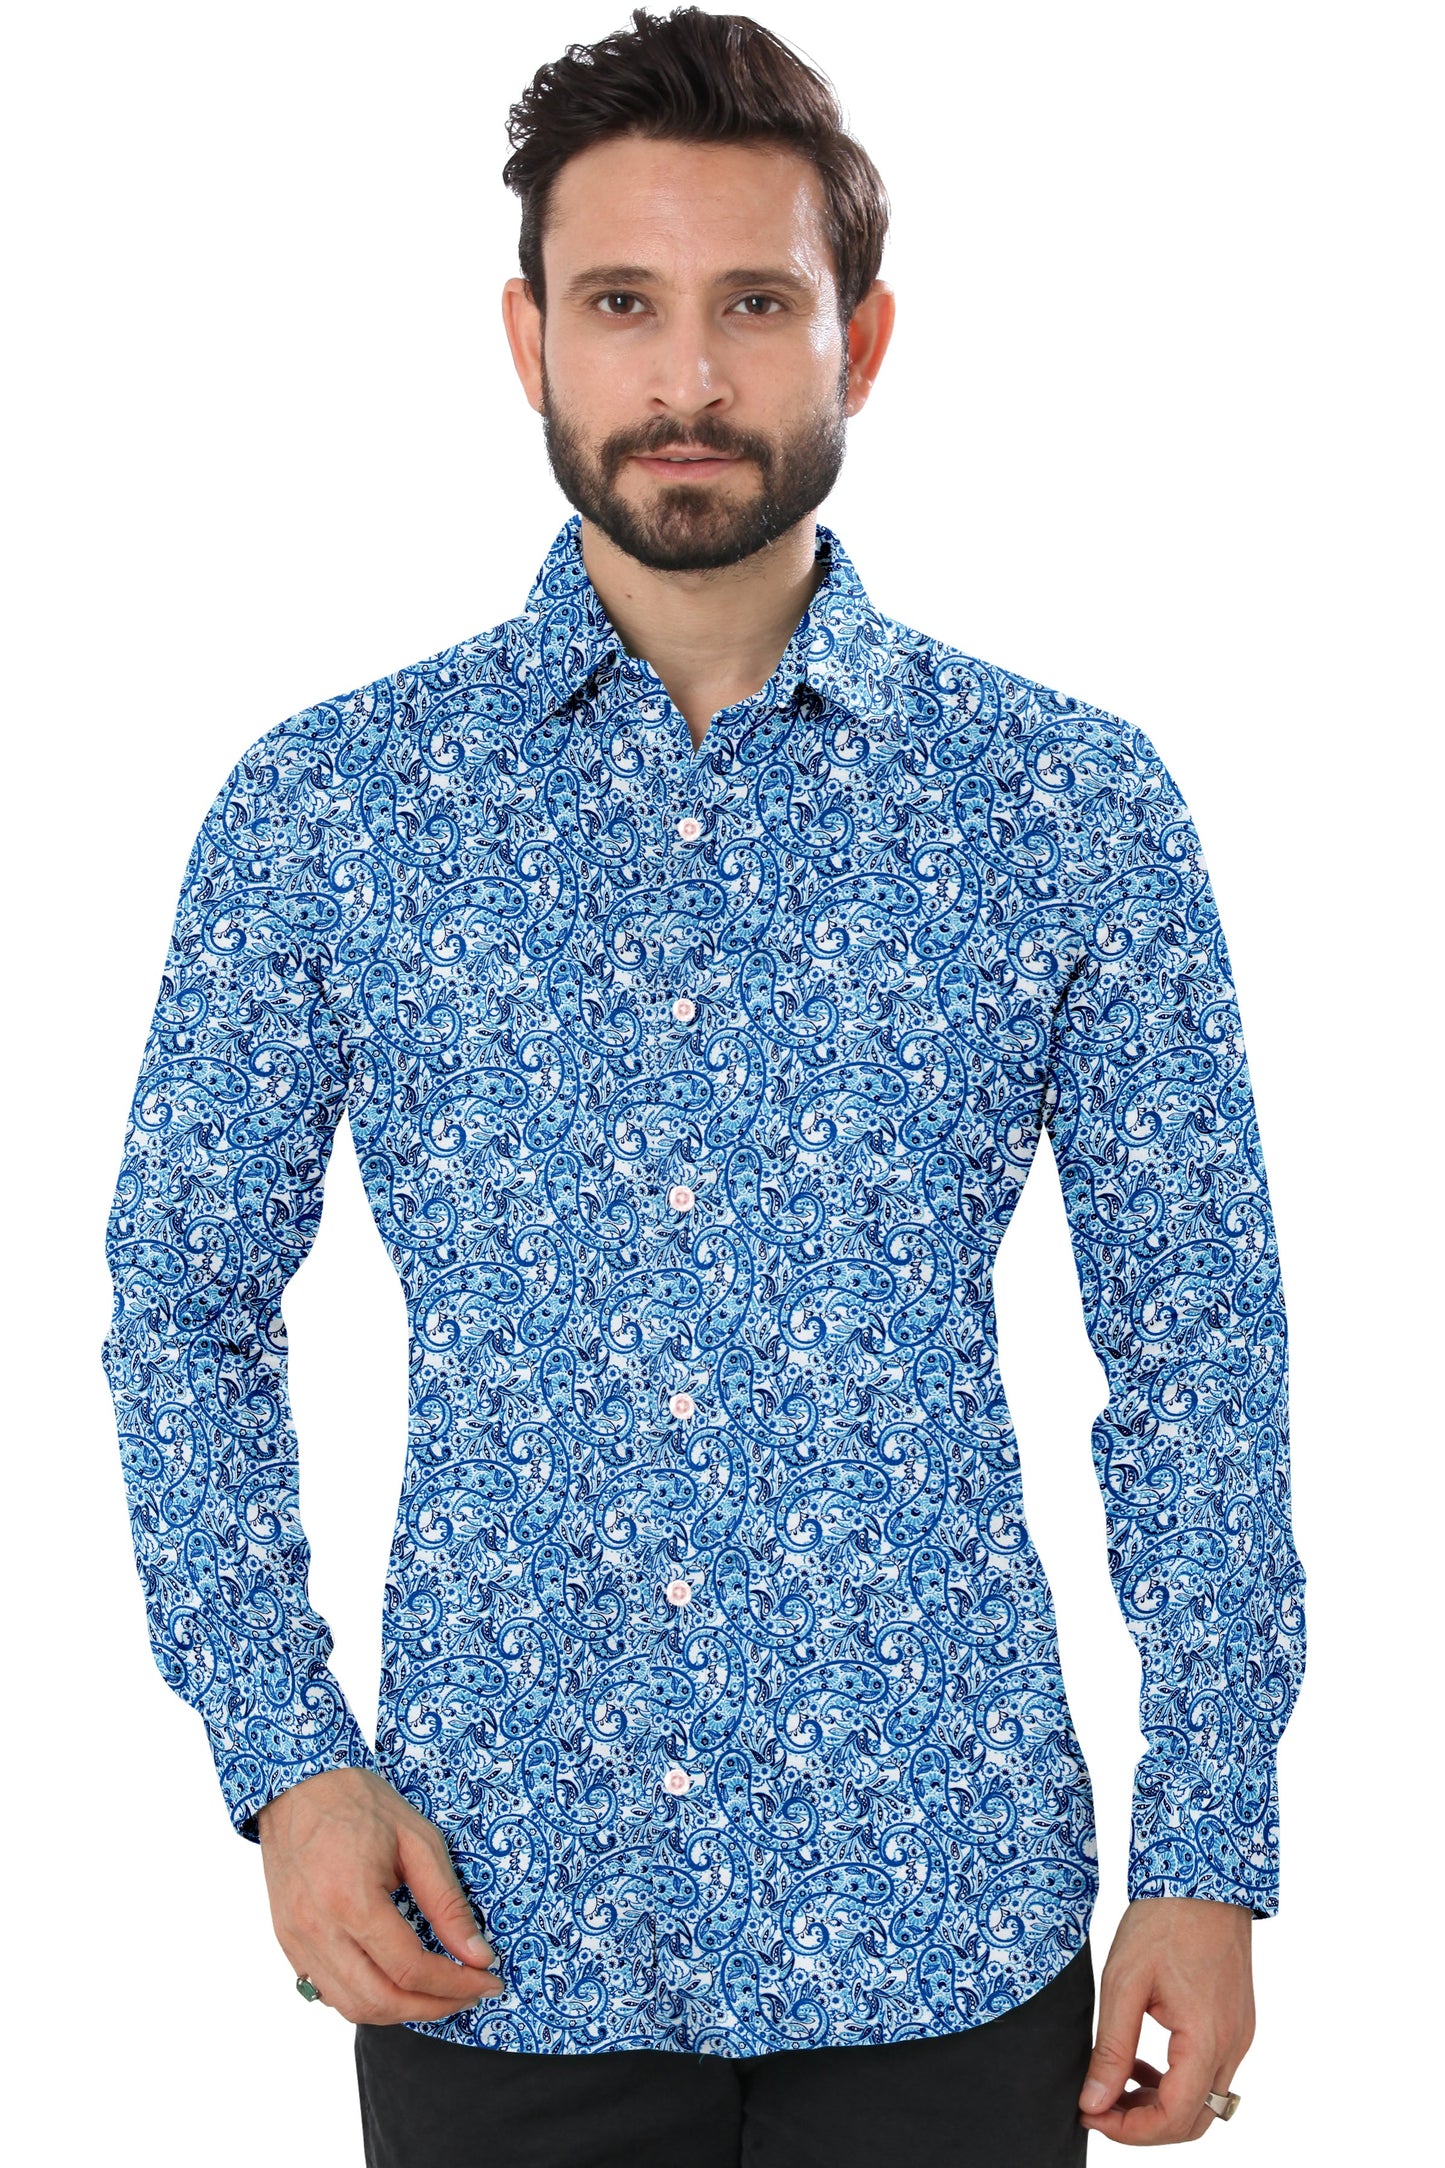 Men's Blue Printed Casual Shirt Full Sleeves 100% Cotton 